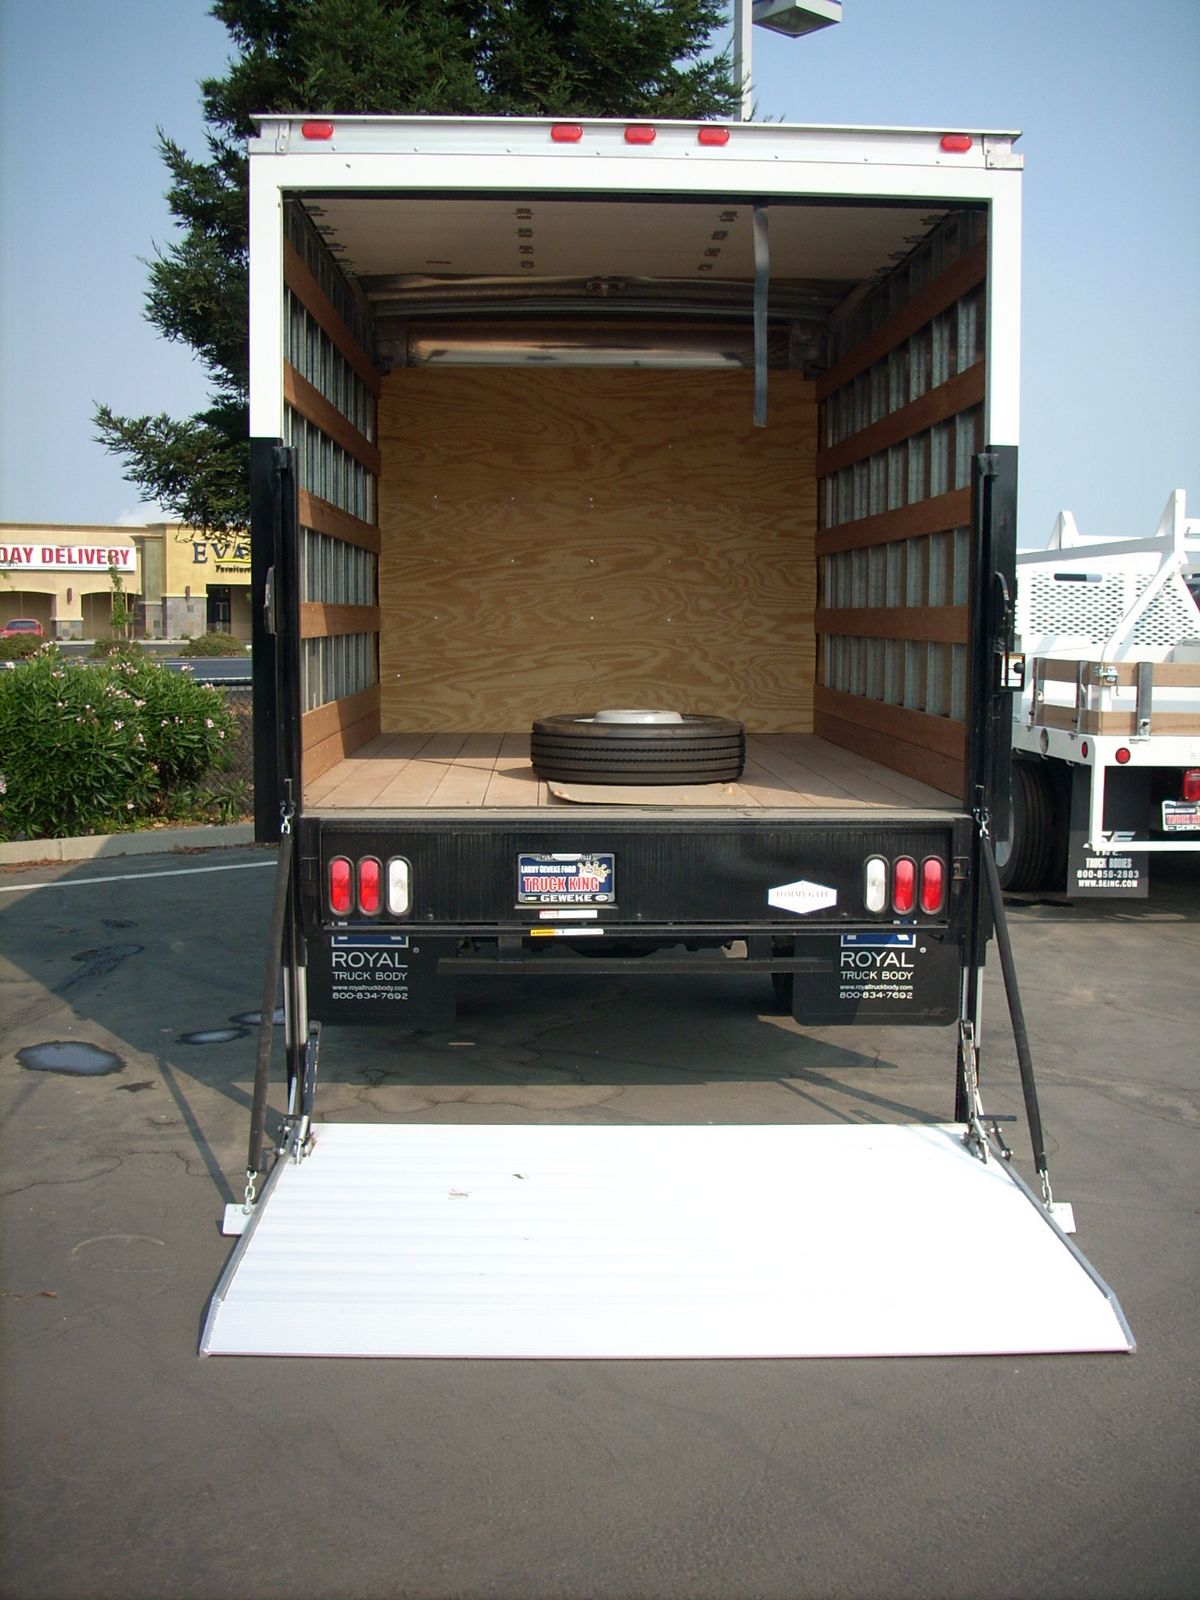 2008 Ford f550 payload #1